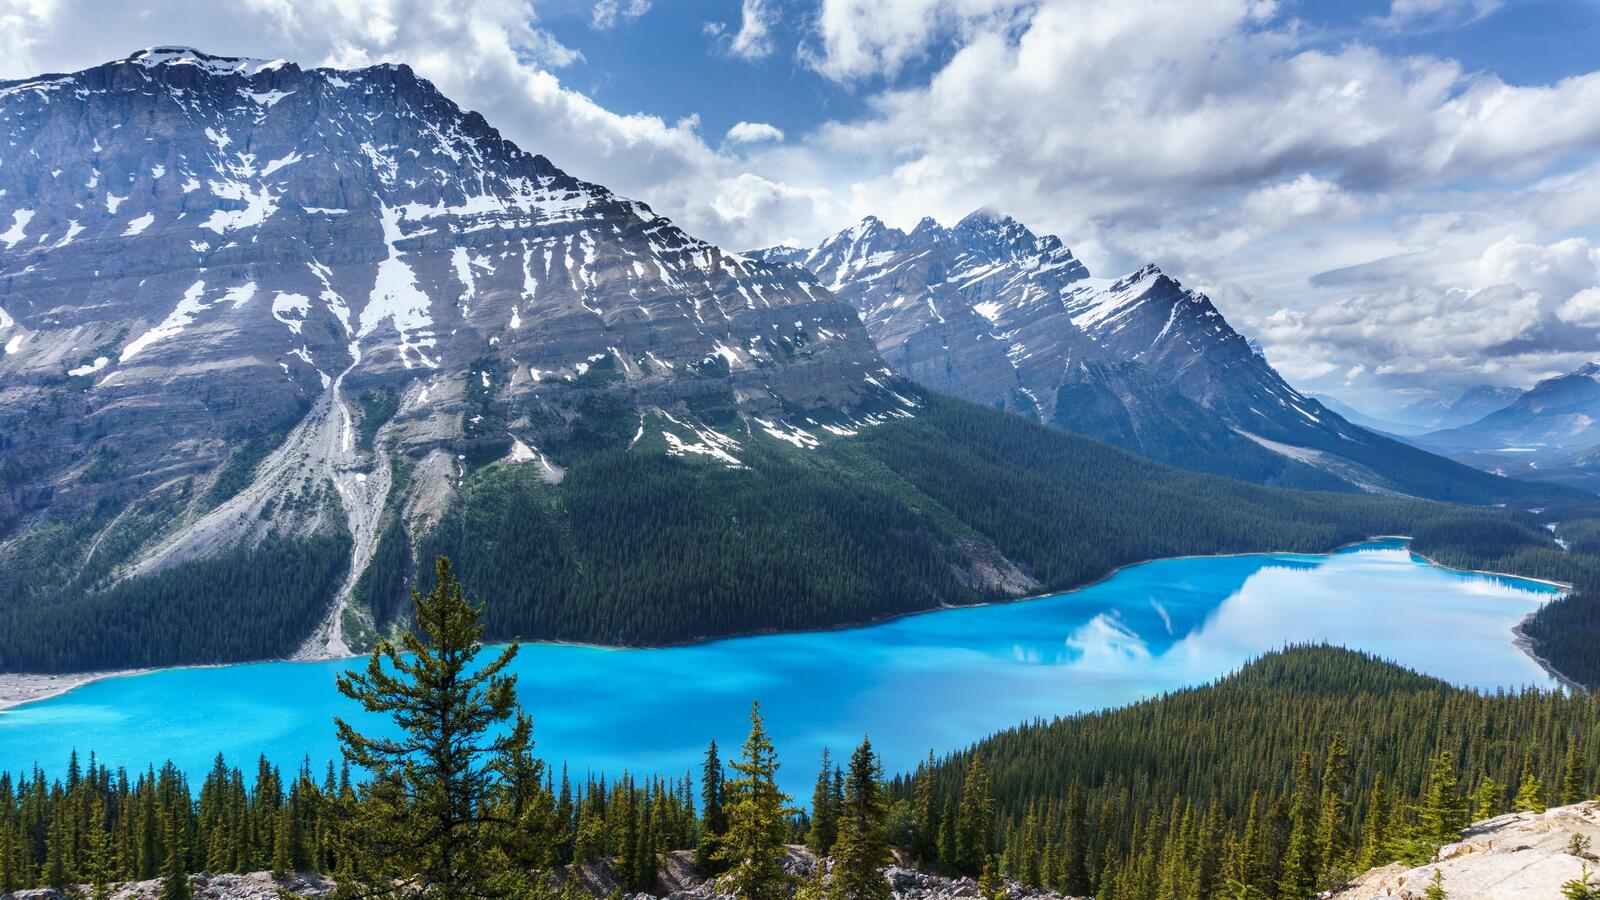 Wallpapers nature Banff National Park mountains on the desktop